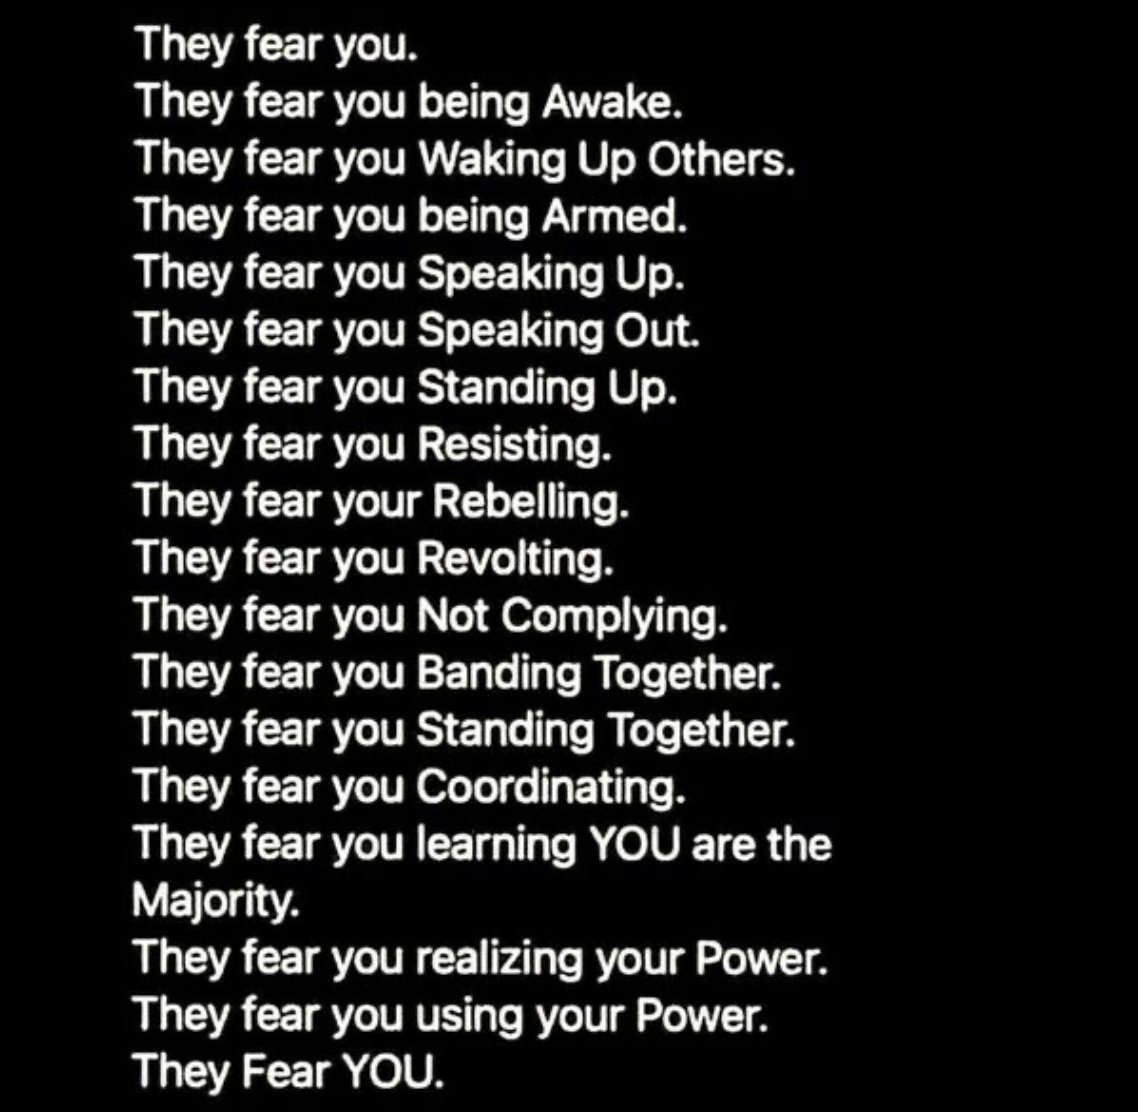 It doesn't always seem like it ... but they fear you!
#DoNotConsent  Ever